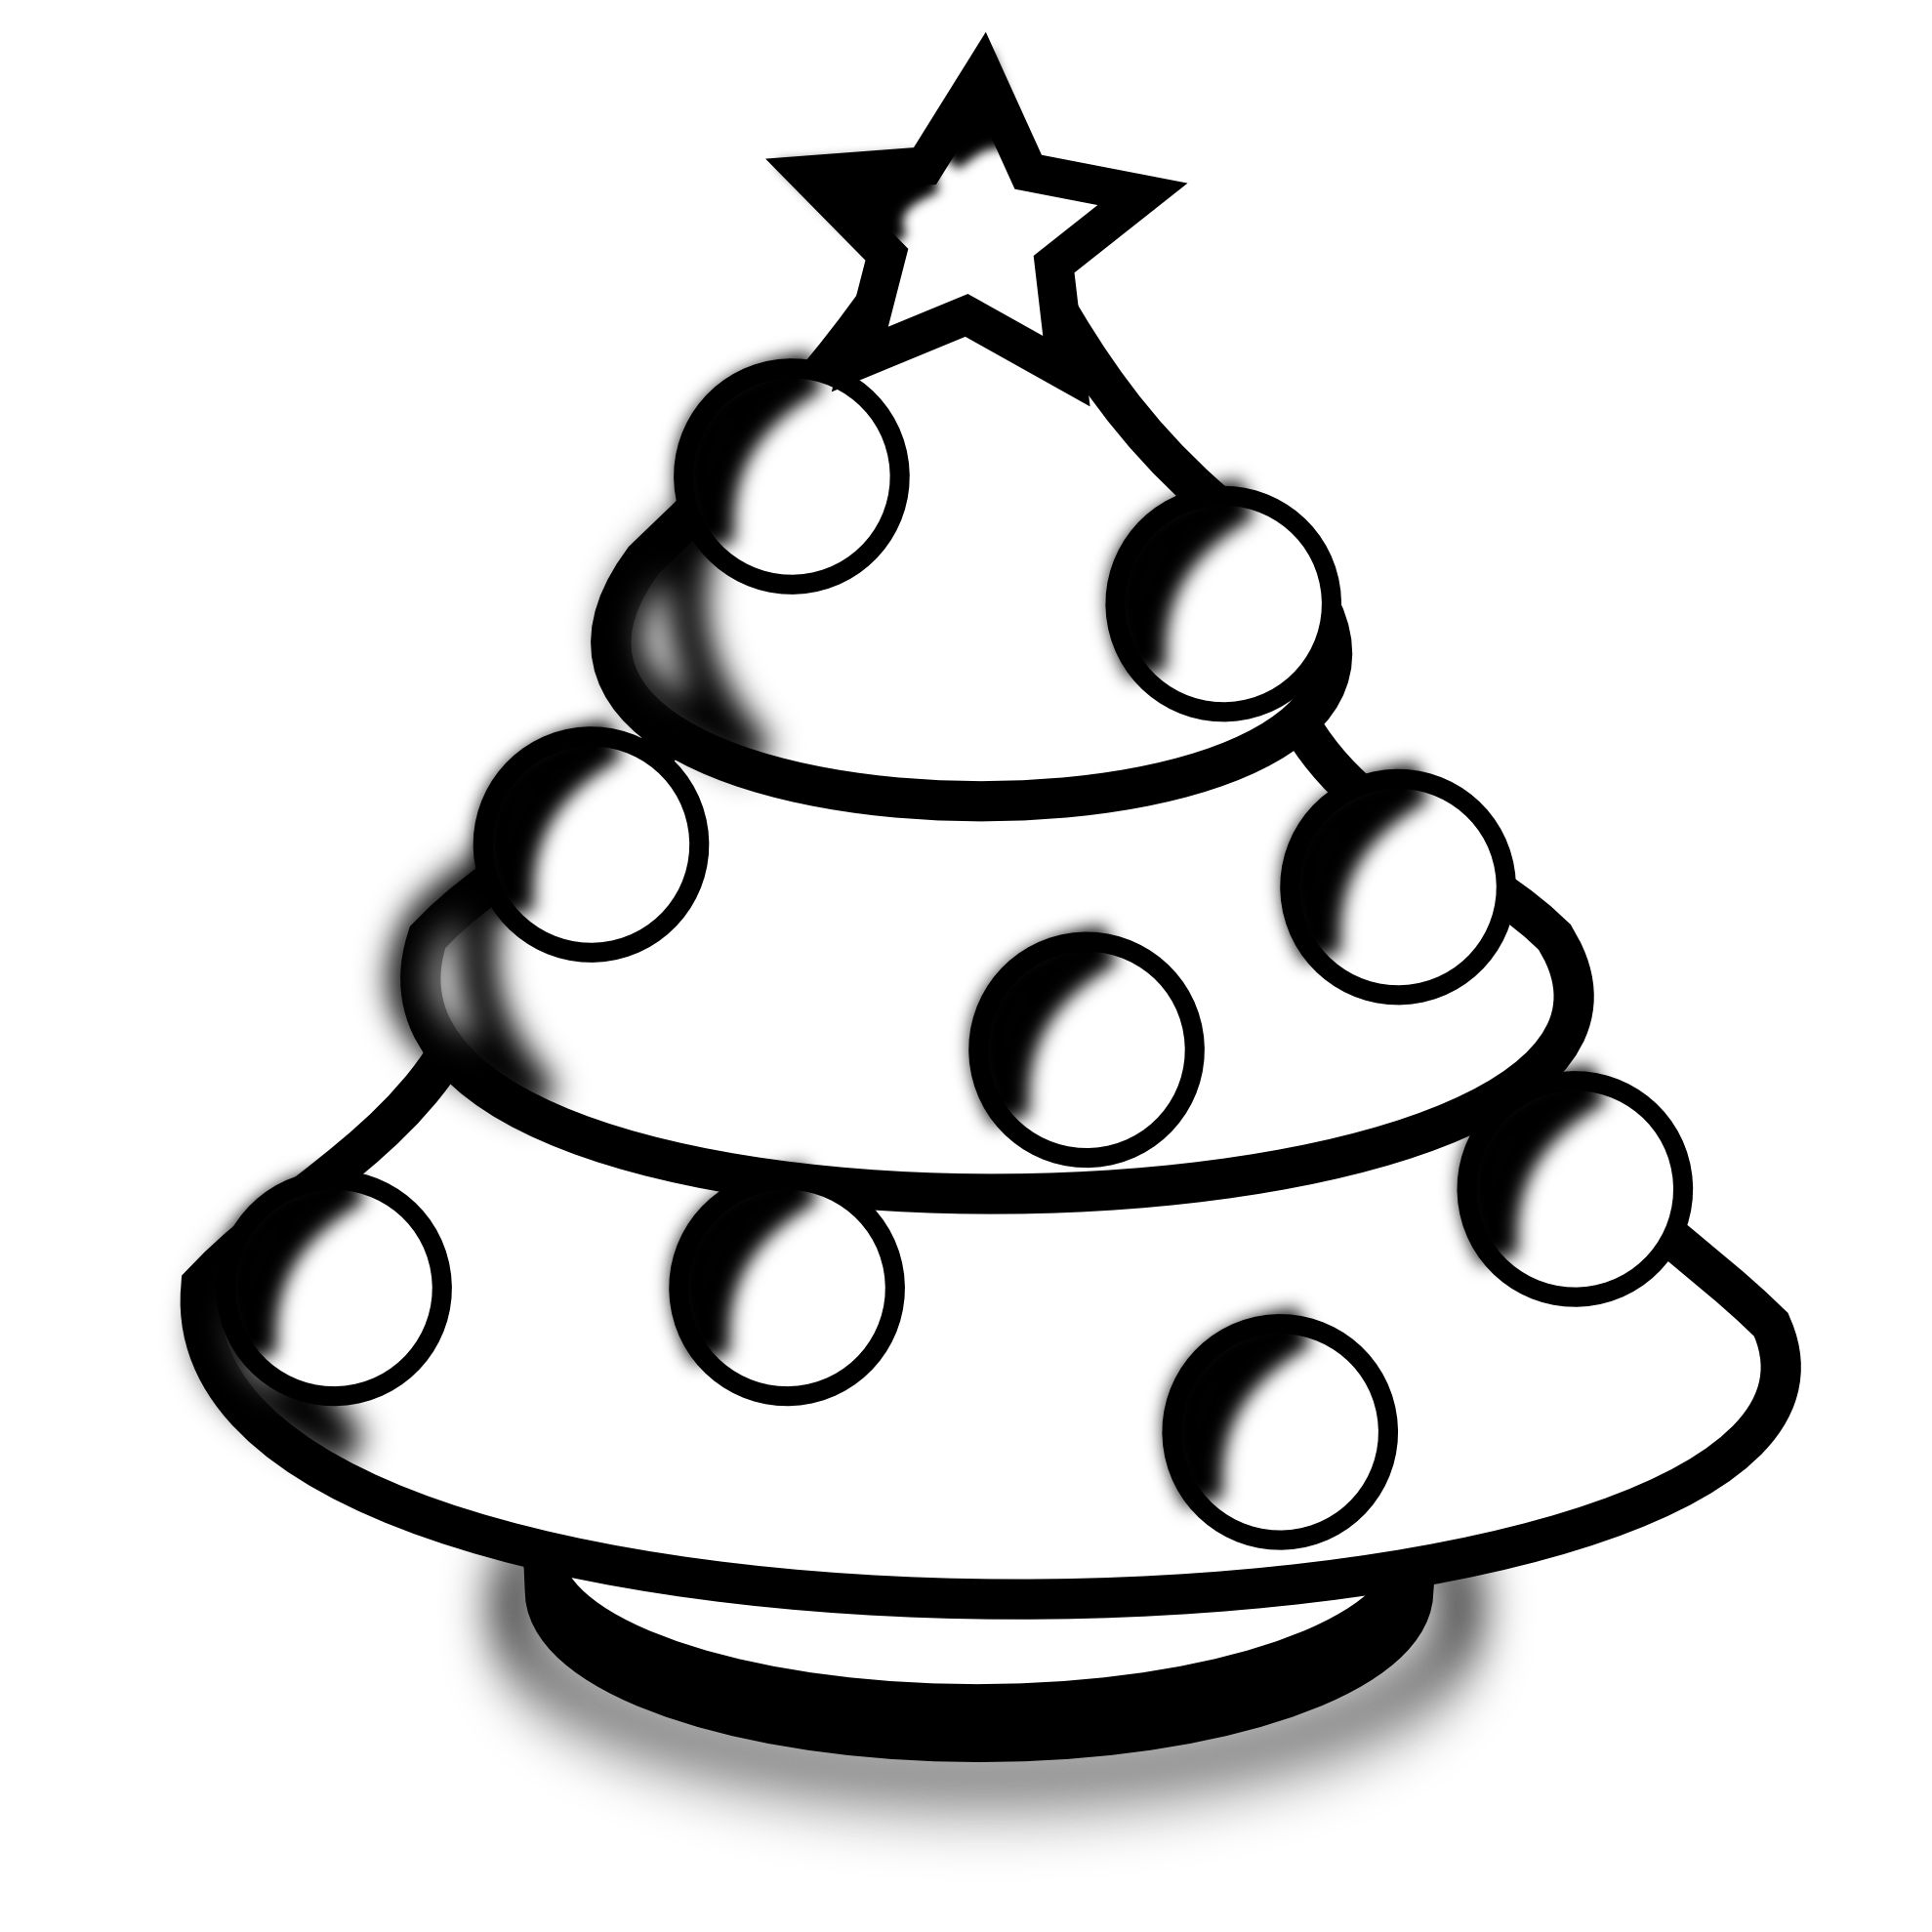 Free black and white christmas clip art downloads